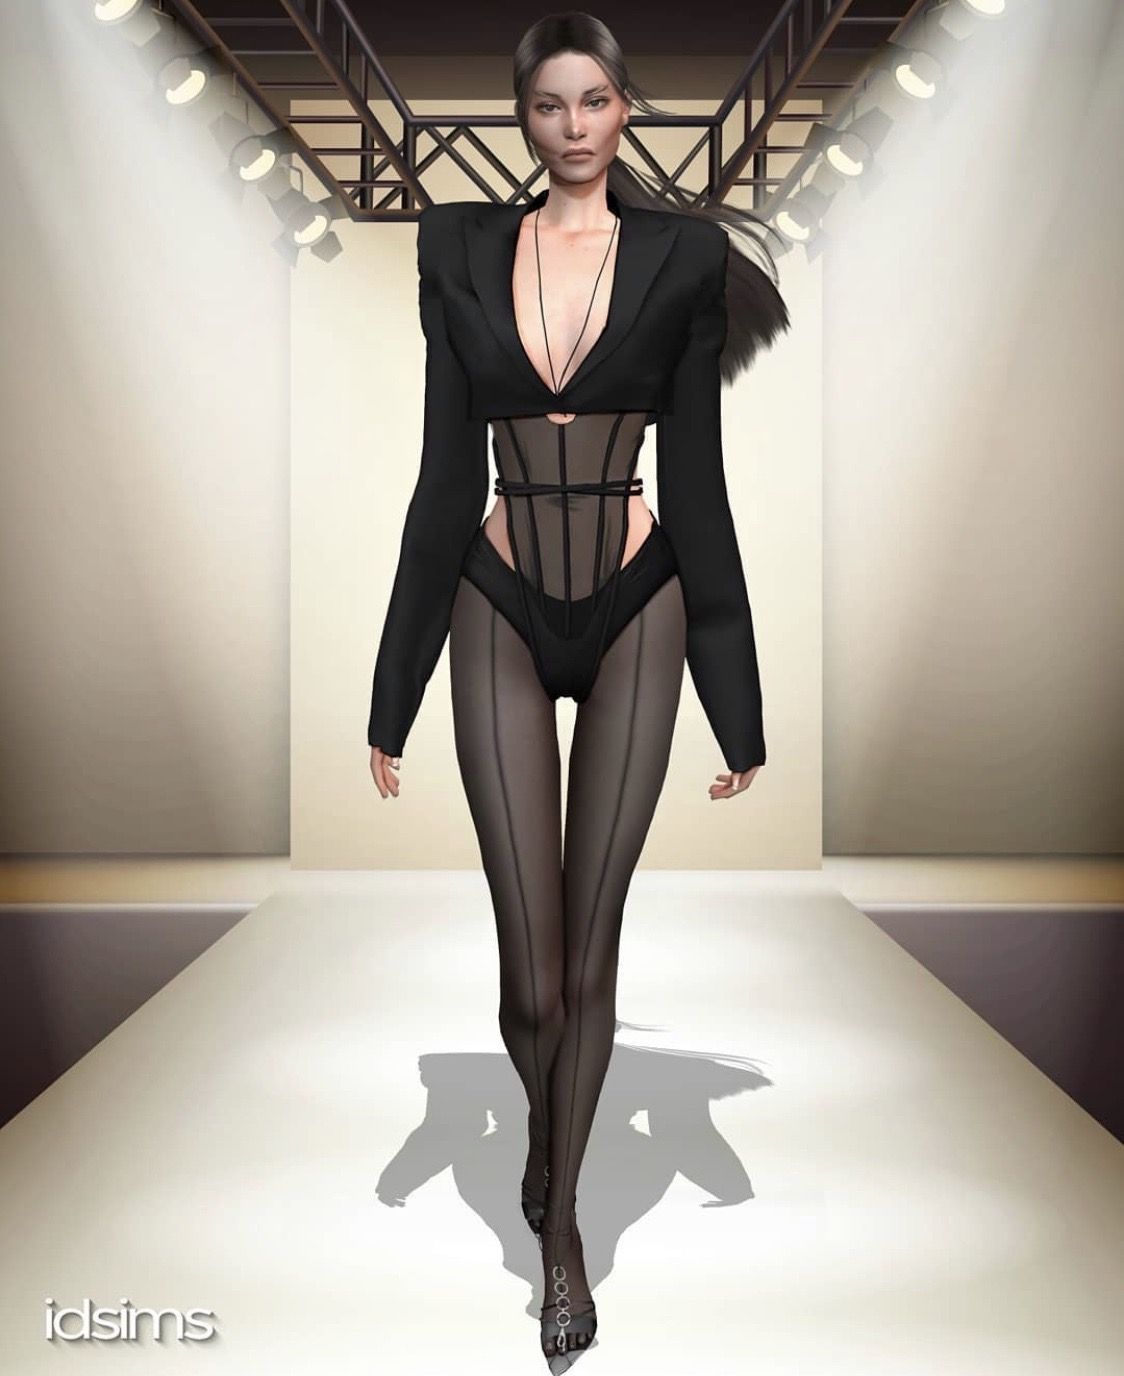 The Sims Game Custom Fashion Saint Laurent How The Sims Became A Hub For Digital Fashion